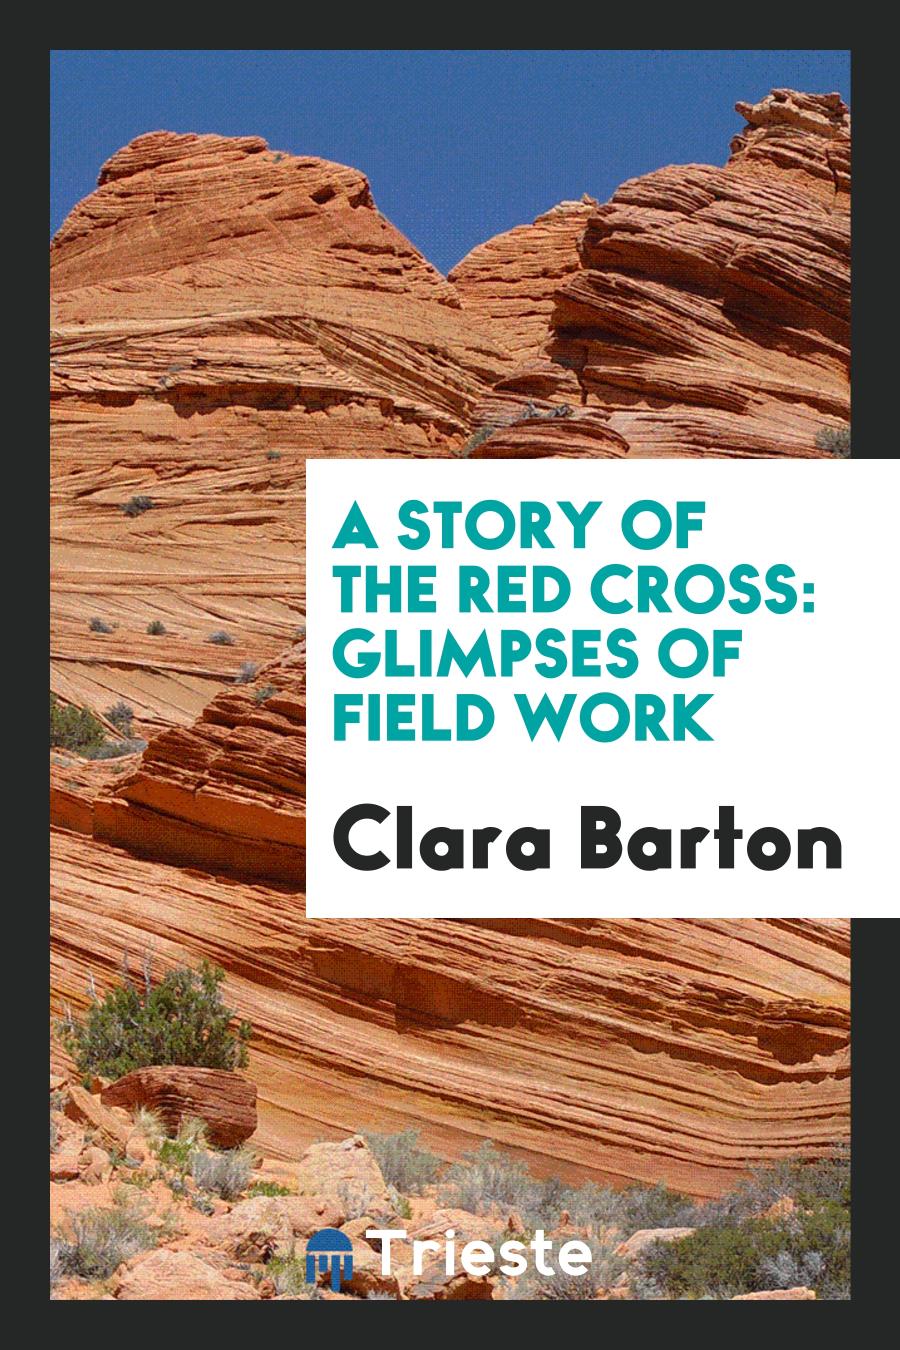 Clara Barton - A Story of the Red Cross: Glimpses of Field Work